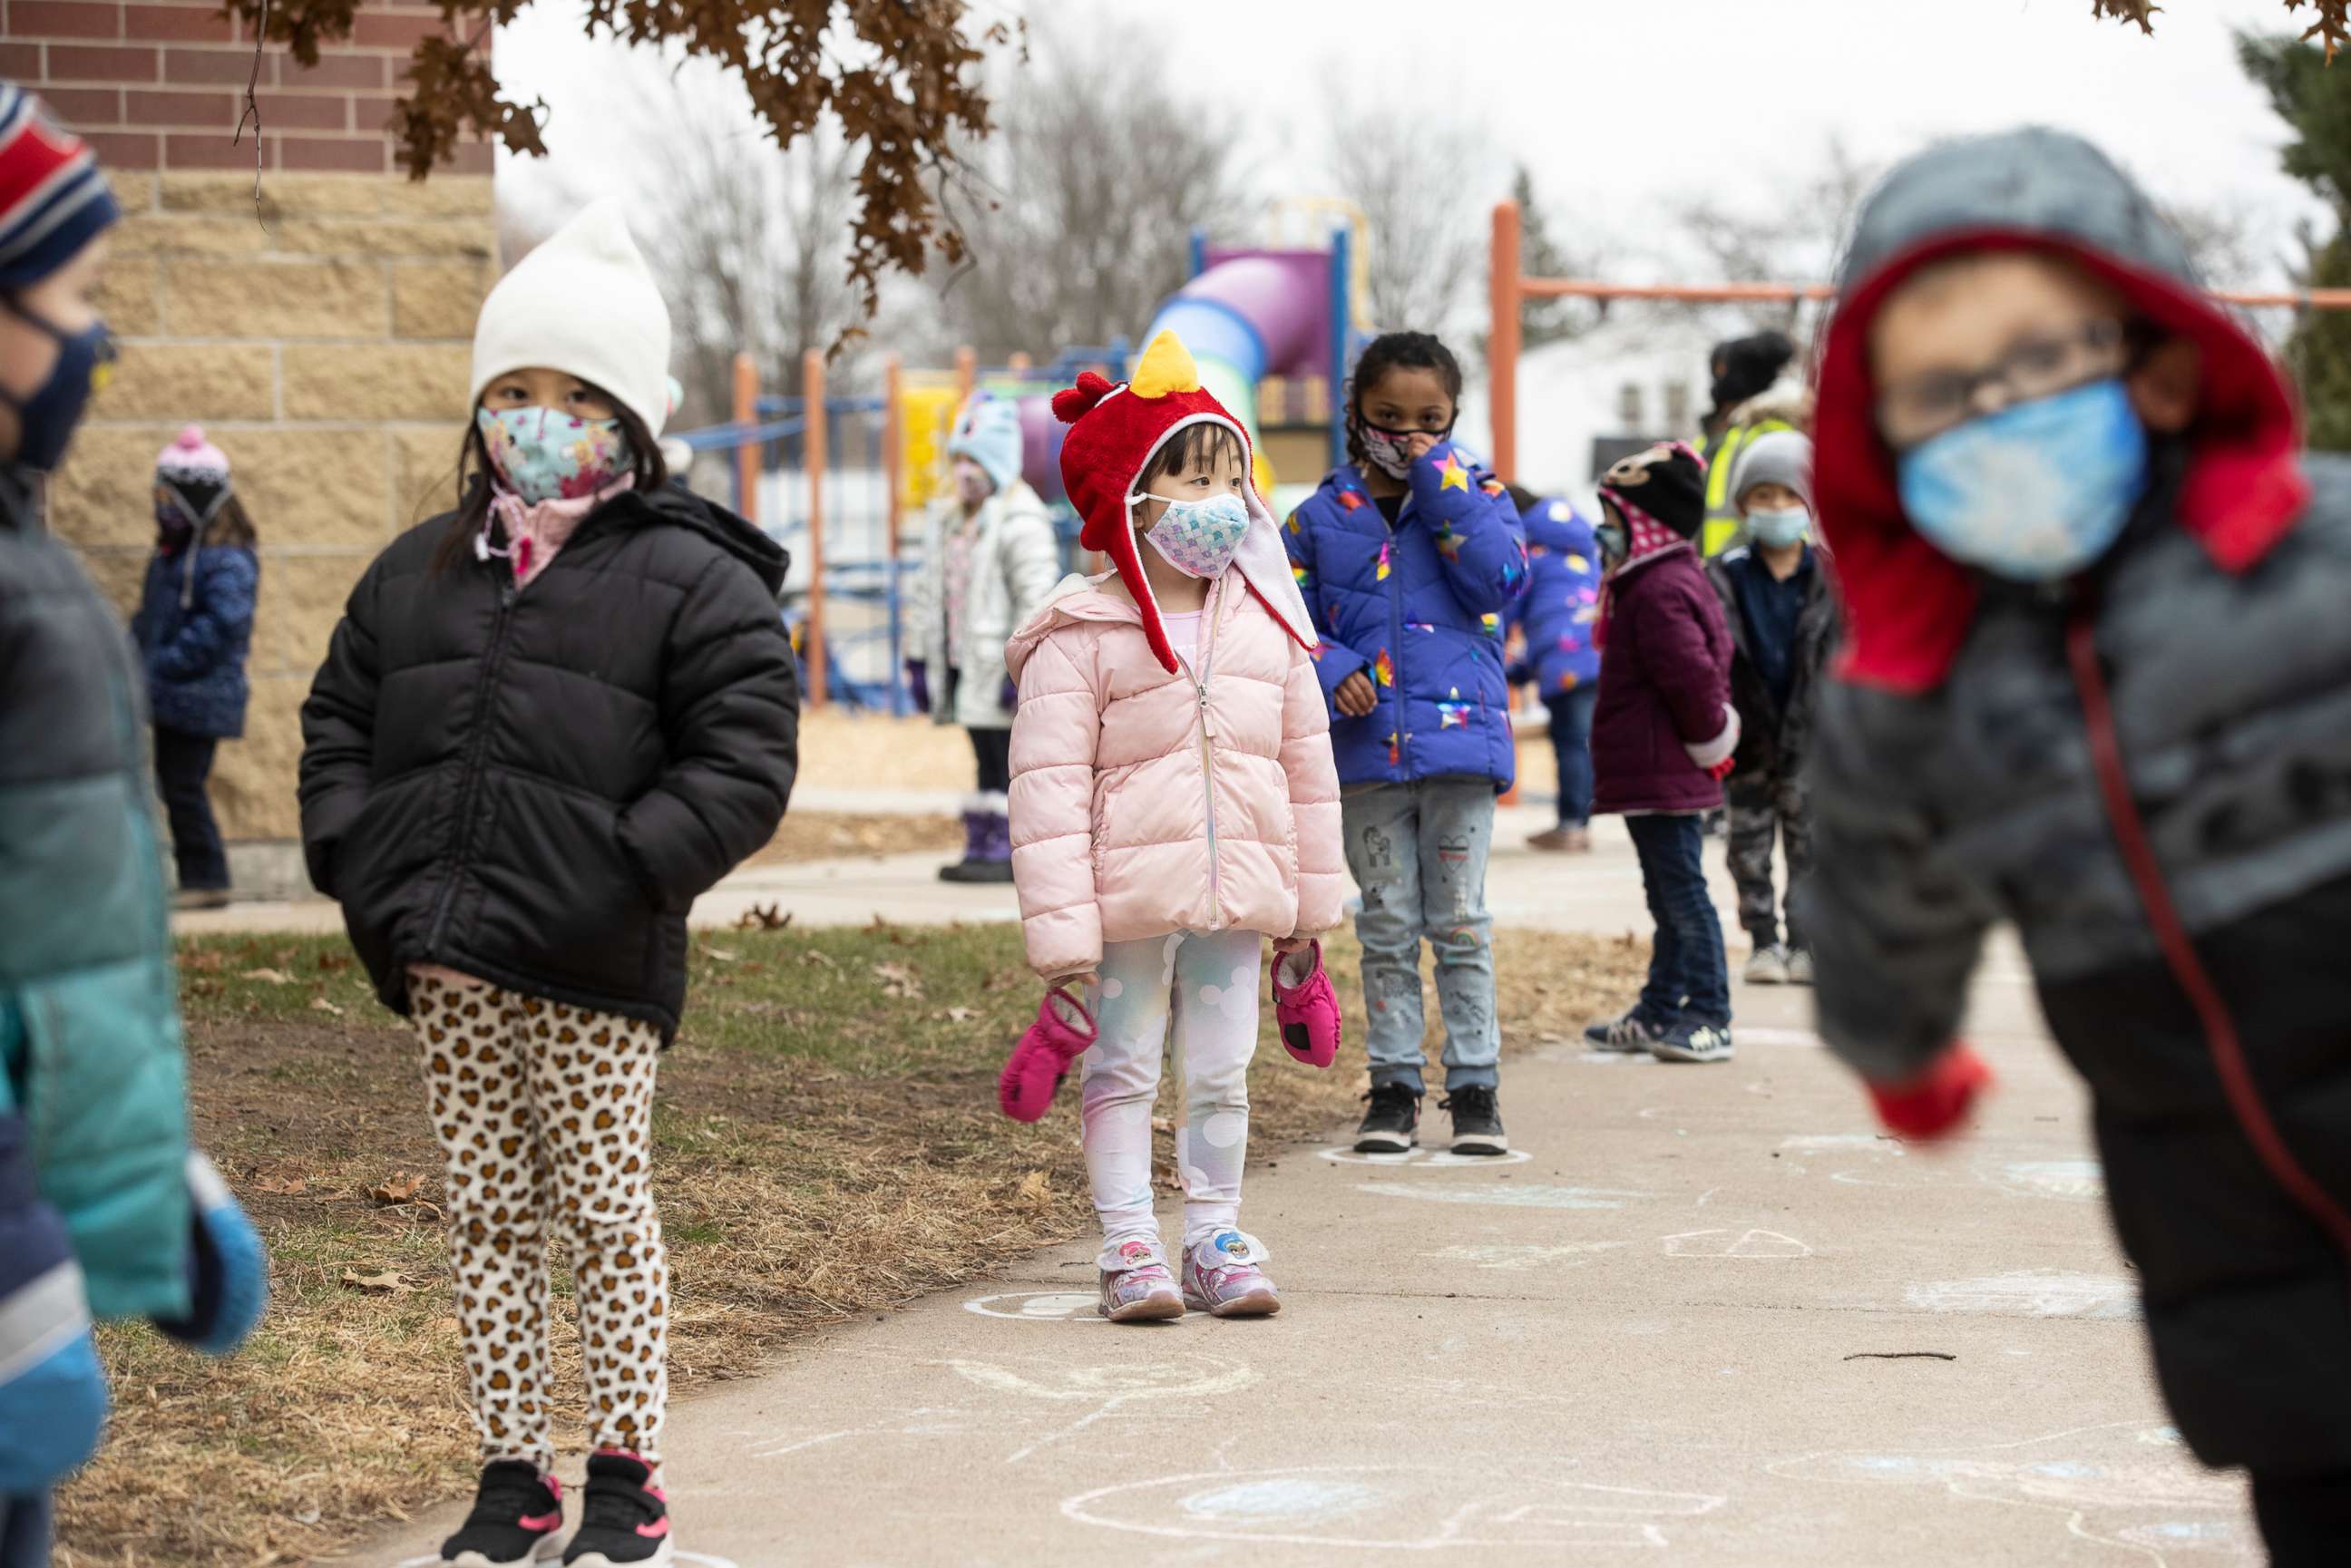 PHOTO: Students line up on designated spots after recess before returning to their classrooms at G.D. Jones Elementary in Wausau, Wis., Dec. 7, 2020.